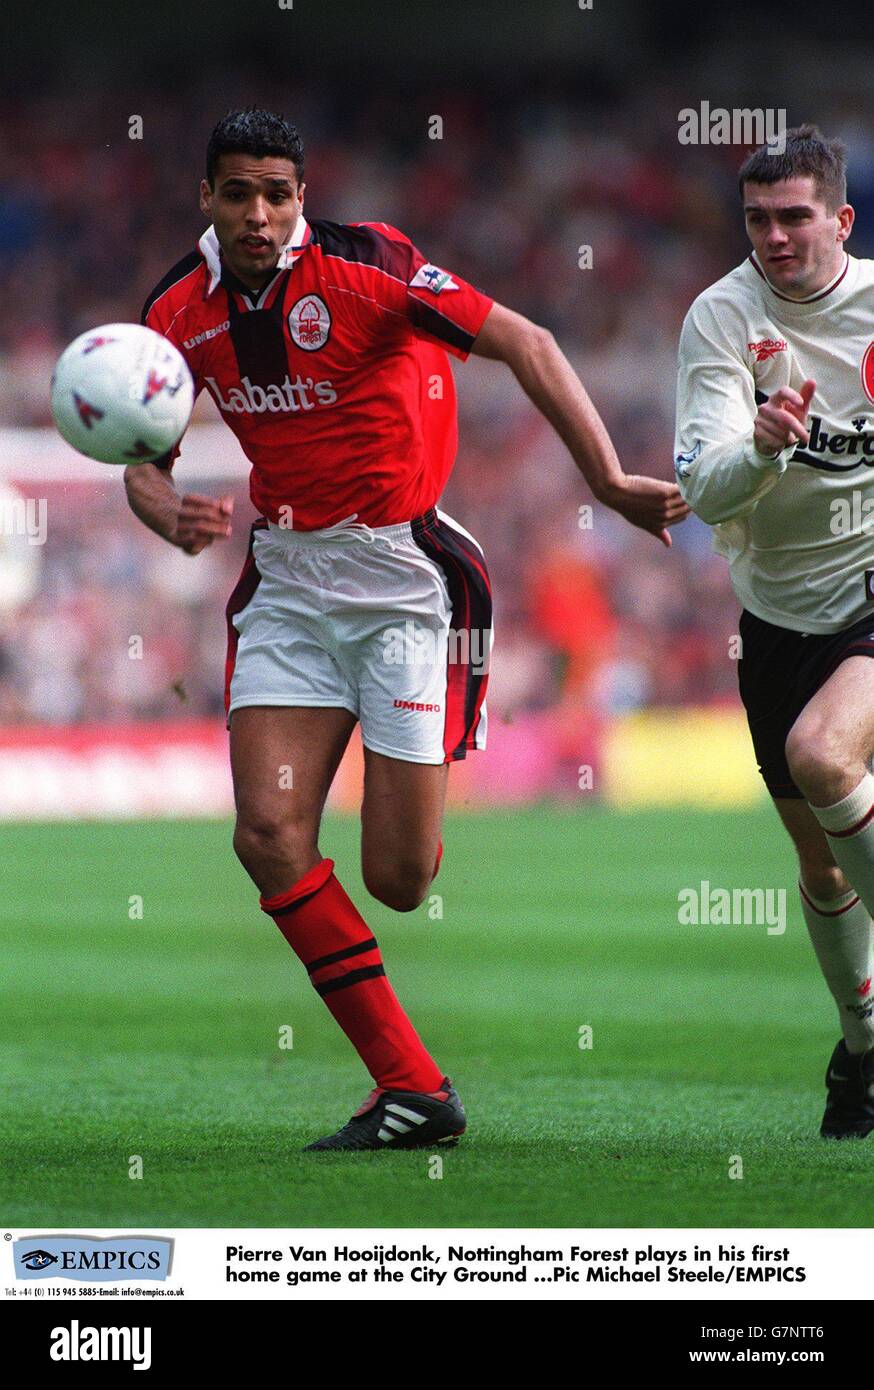 Soccer - Carling Premiership - Nottingham Forest v Liverpool. Pierre Van Hooijdonk, Nottingham Forest plays in his first home game at the City Ground Stock Photo